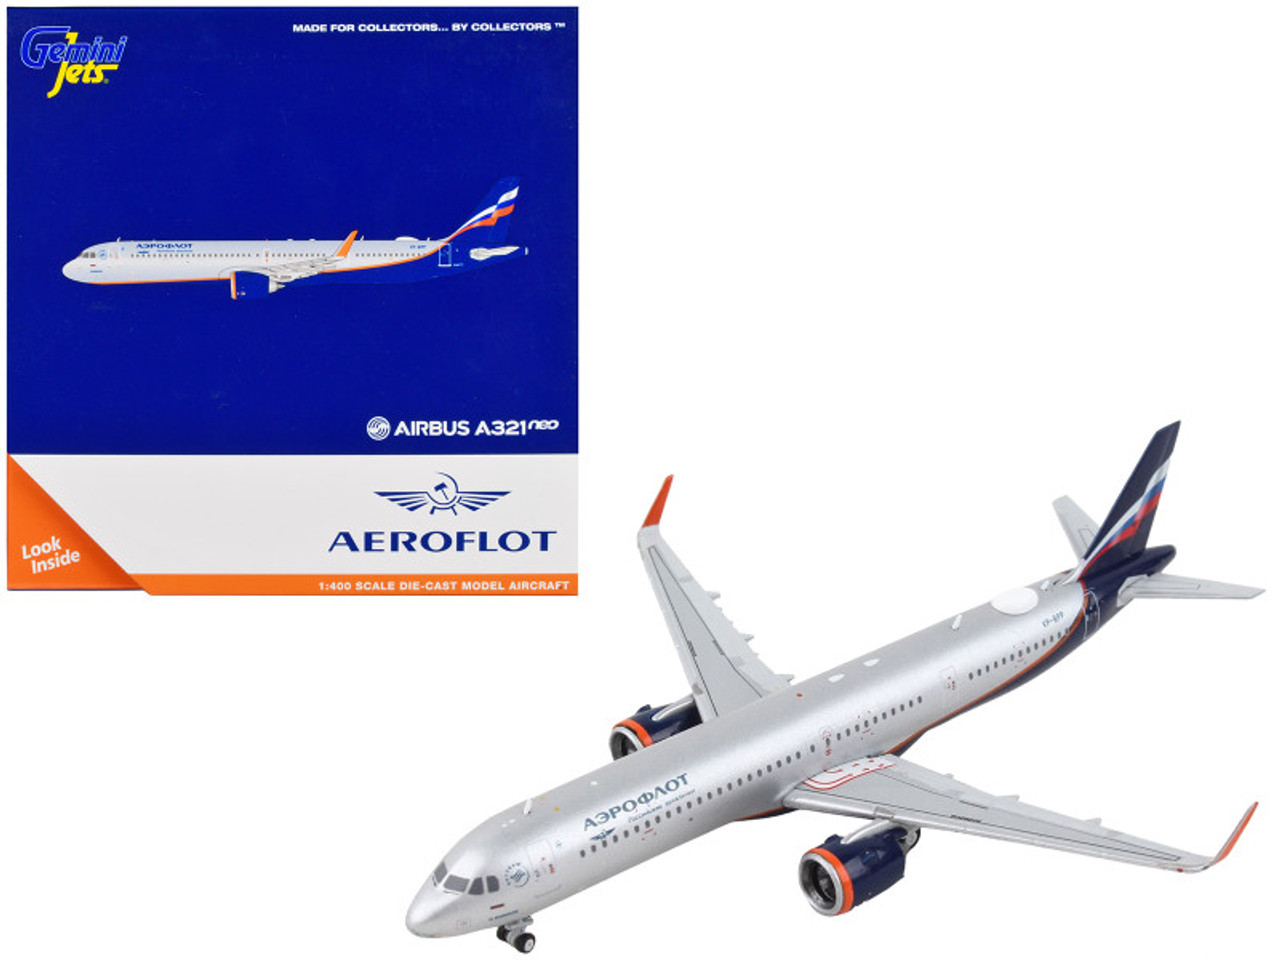 Airbus A321neo Commercial Aircraft "Aeroflot" Silver Metallic with Dark Blue Tail 1/400 Diecast Model Airplane by GeminiJets